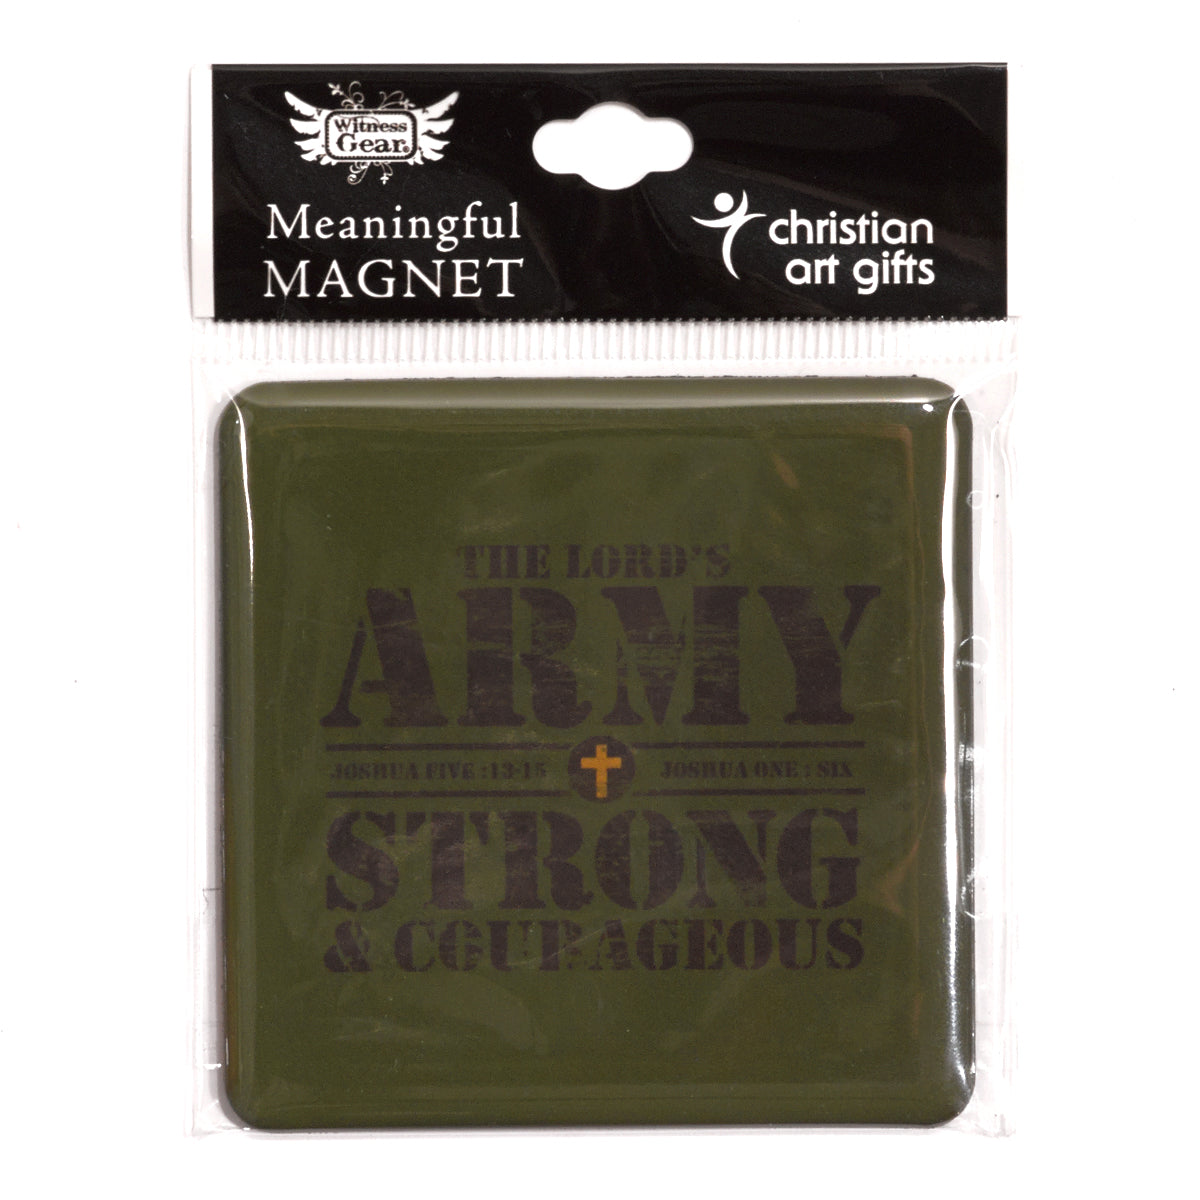 Image of The Lord's Army Meaningful Magnet other